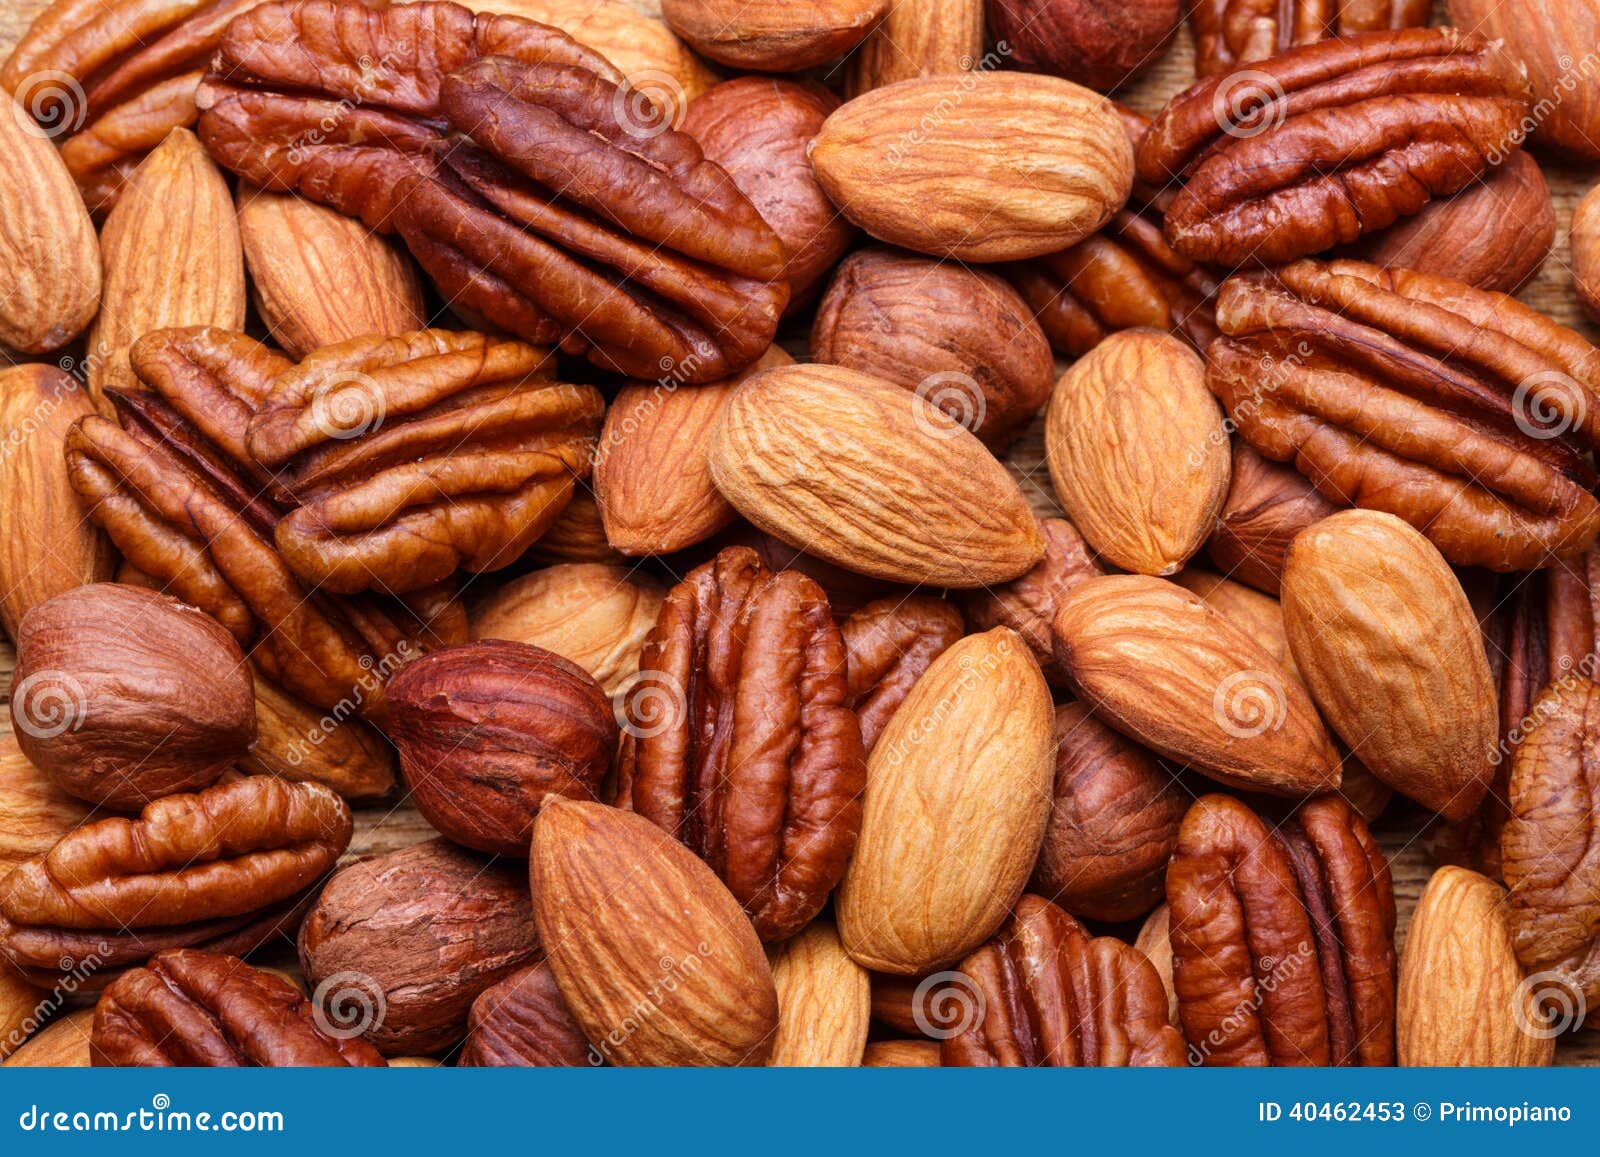 background texture of assorted mixed nuts including cashew, peca